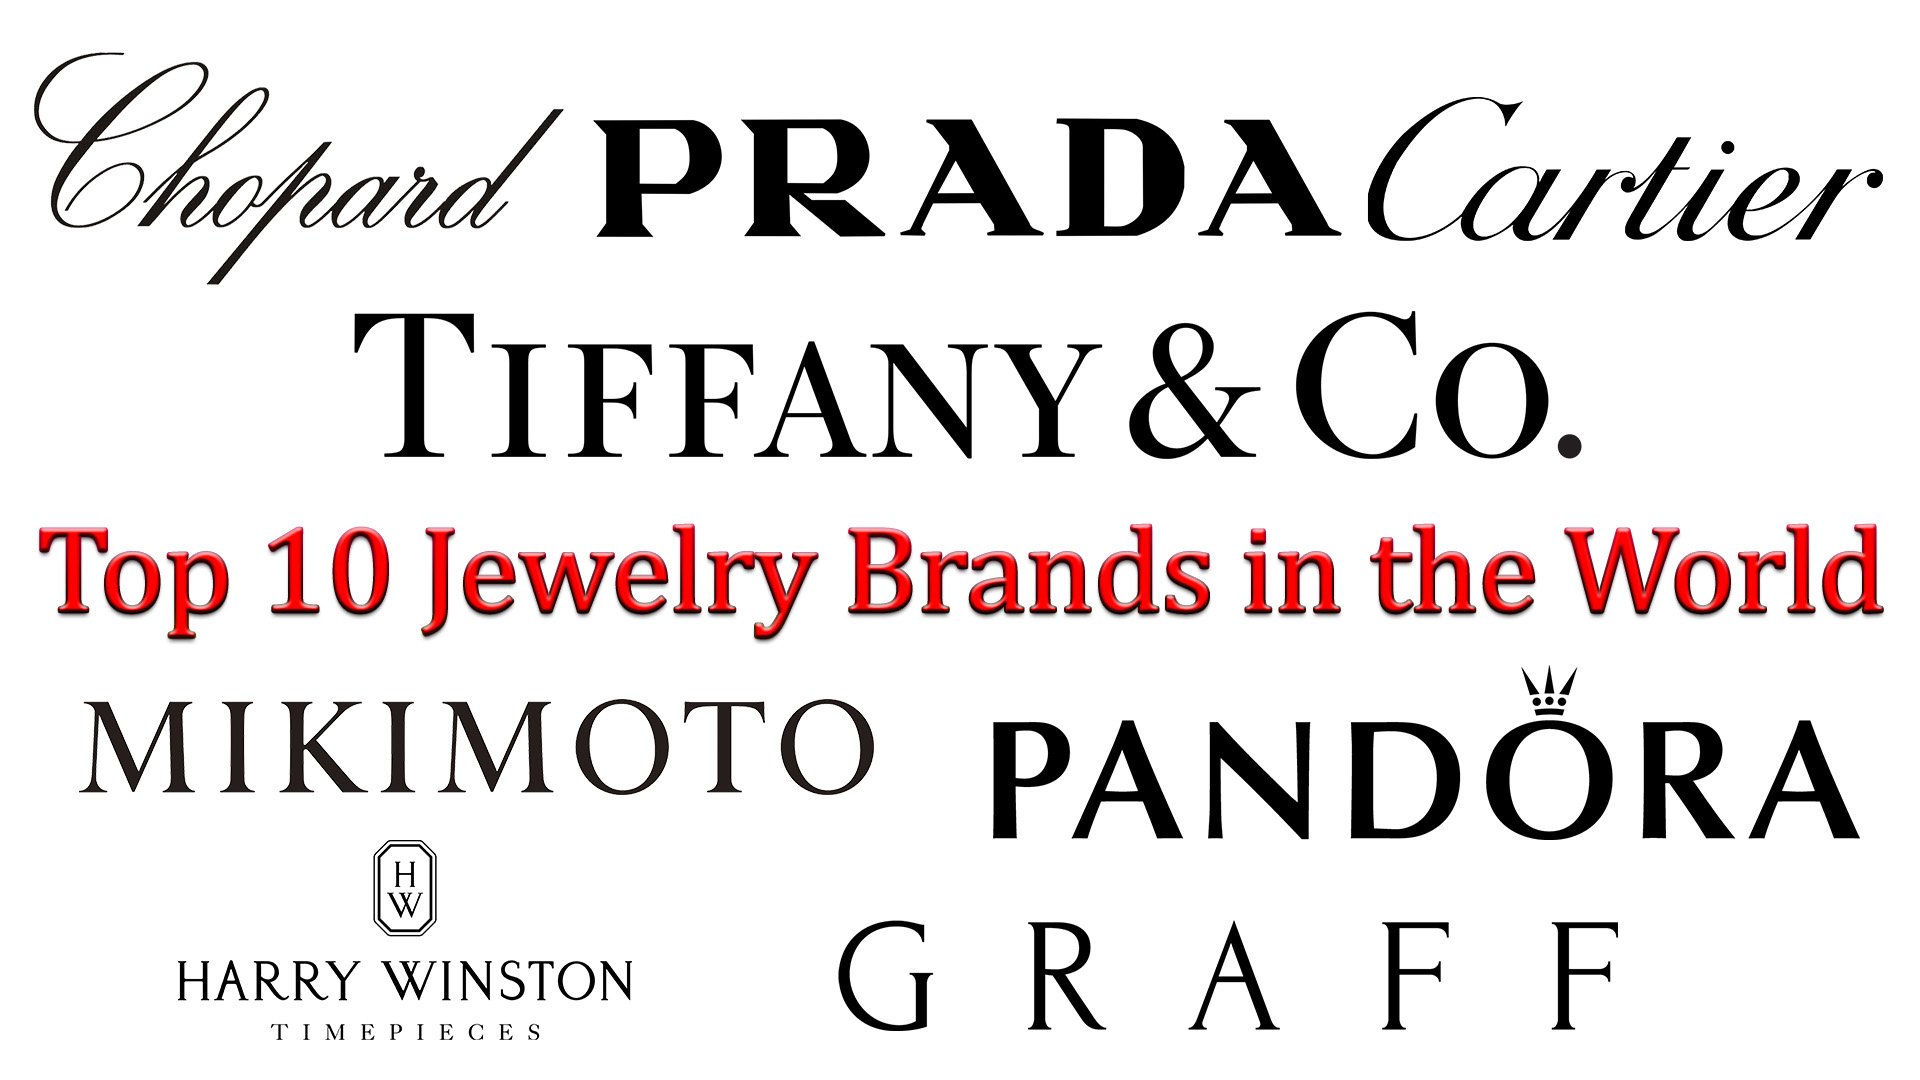 Top 10 Jewelry Brands in the World